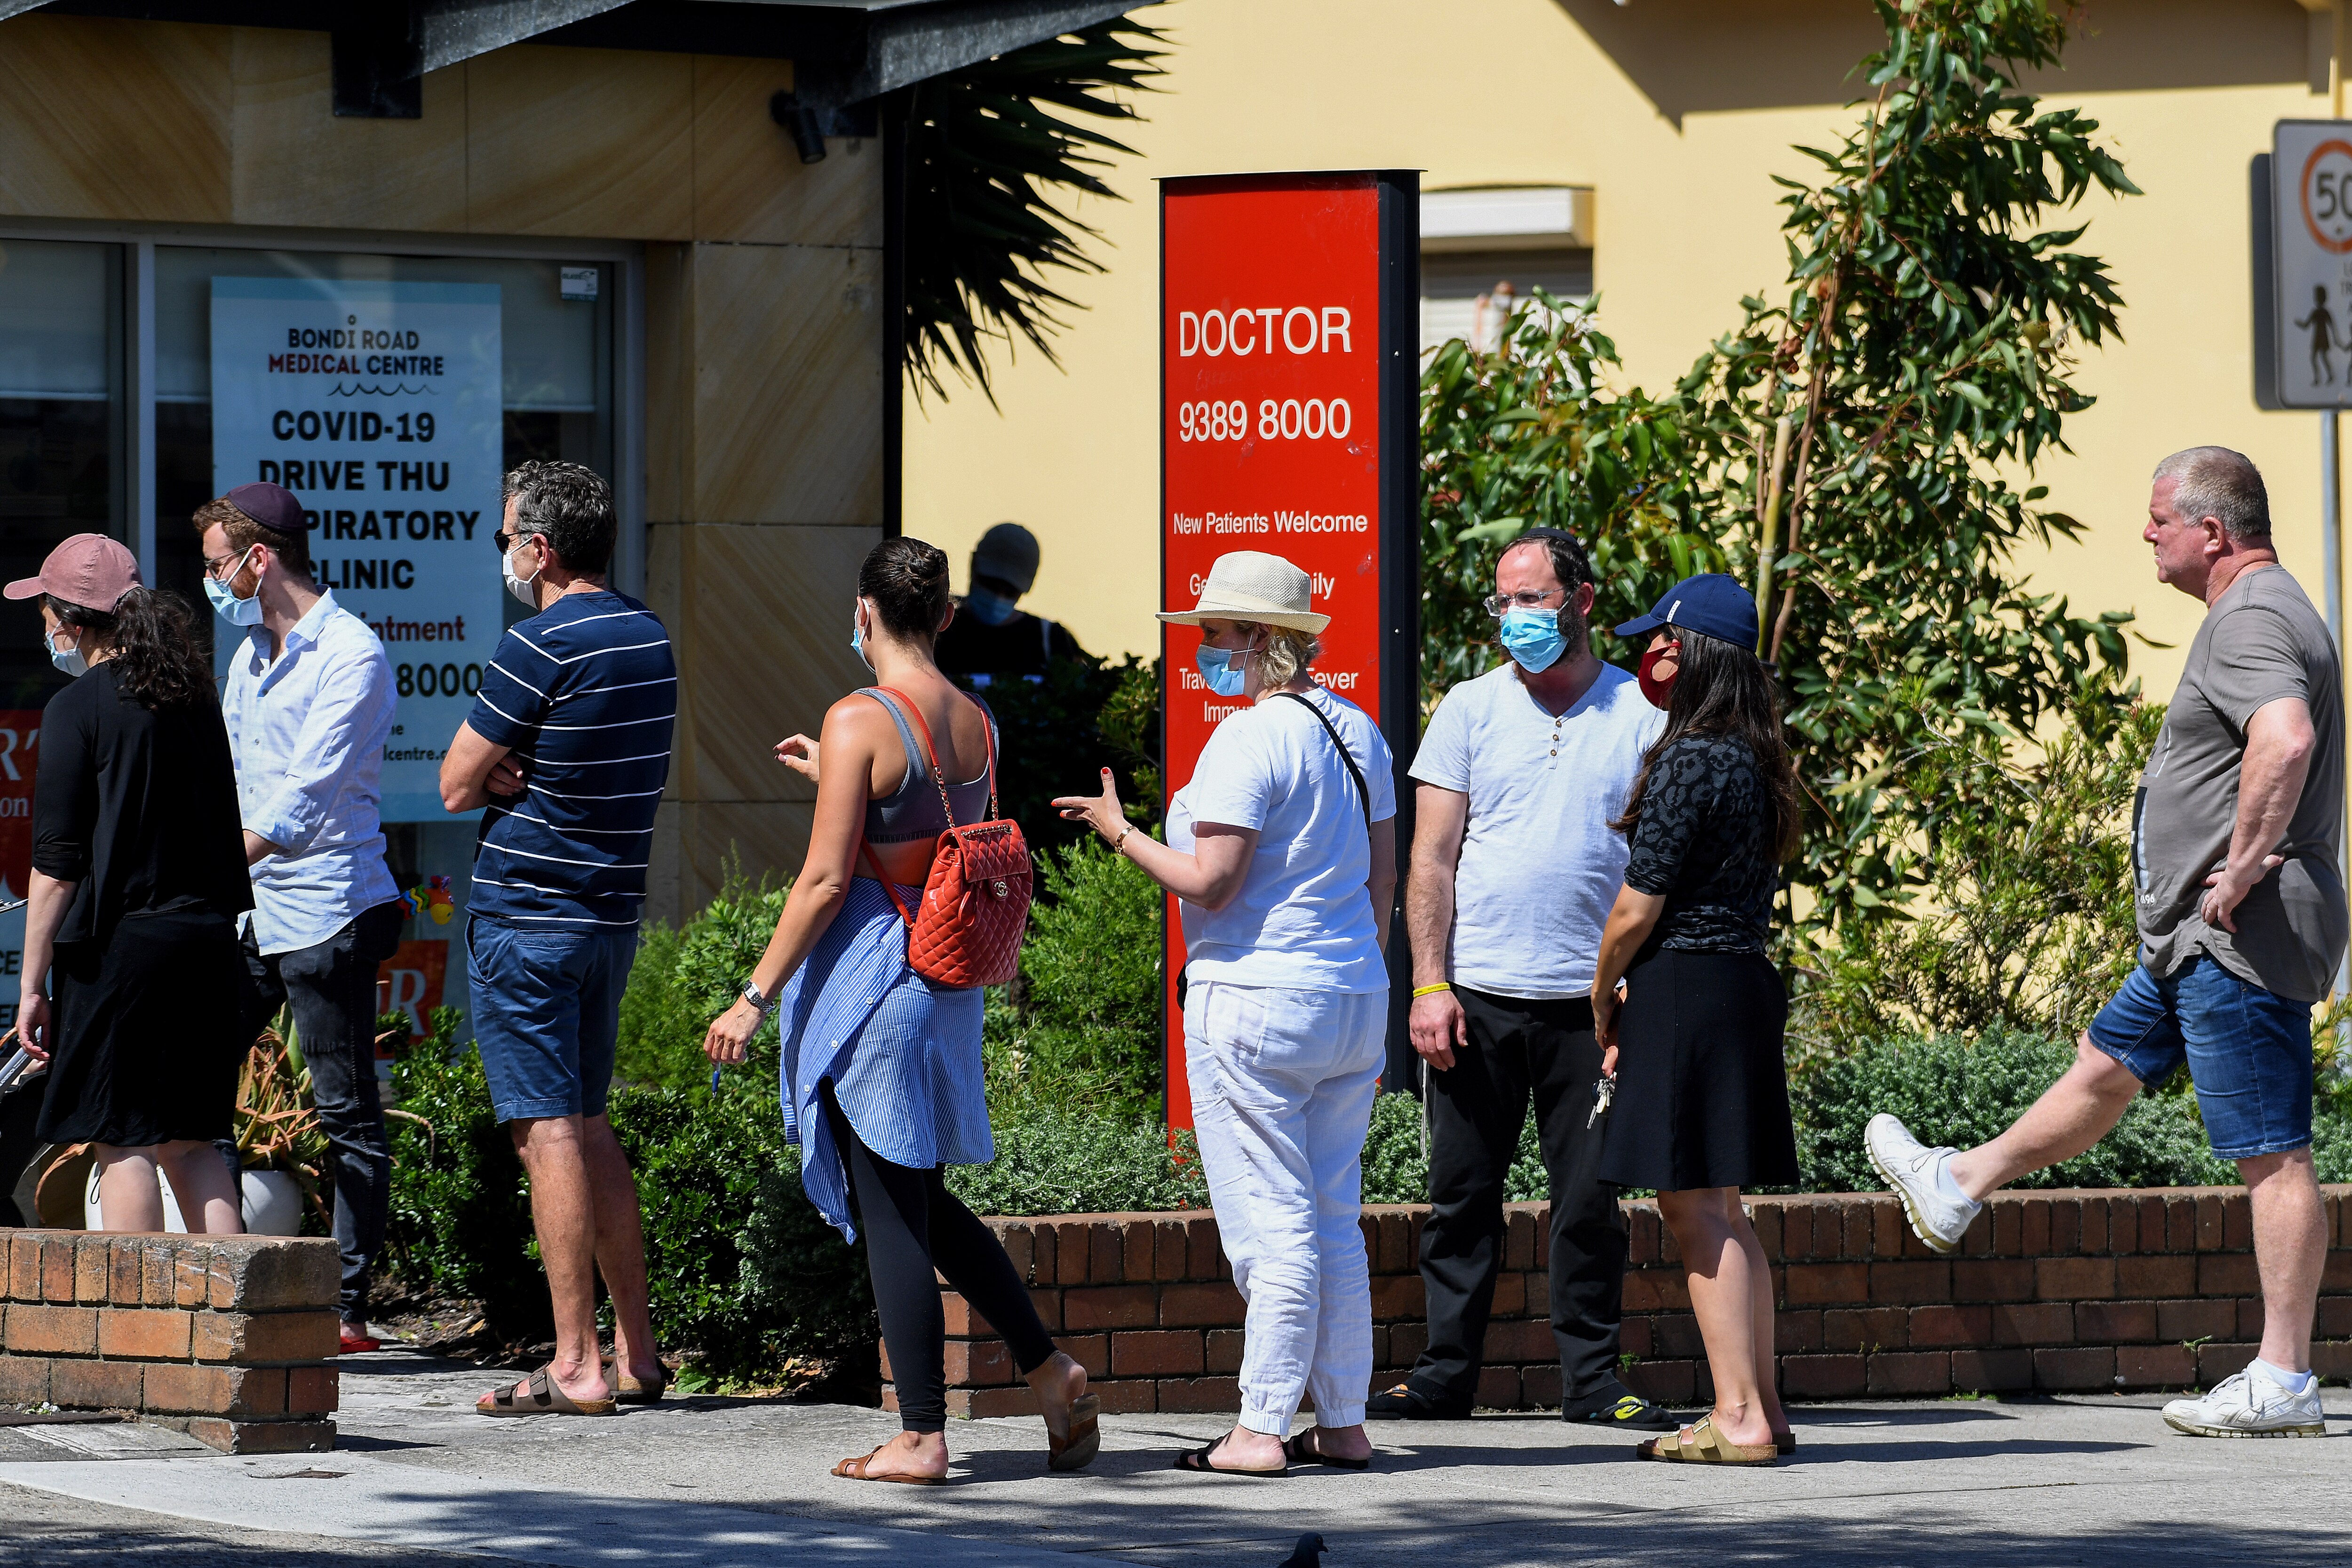 People queue for a COVID-19 PCR test at a doctors surgery in Sydney.